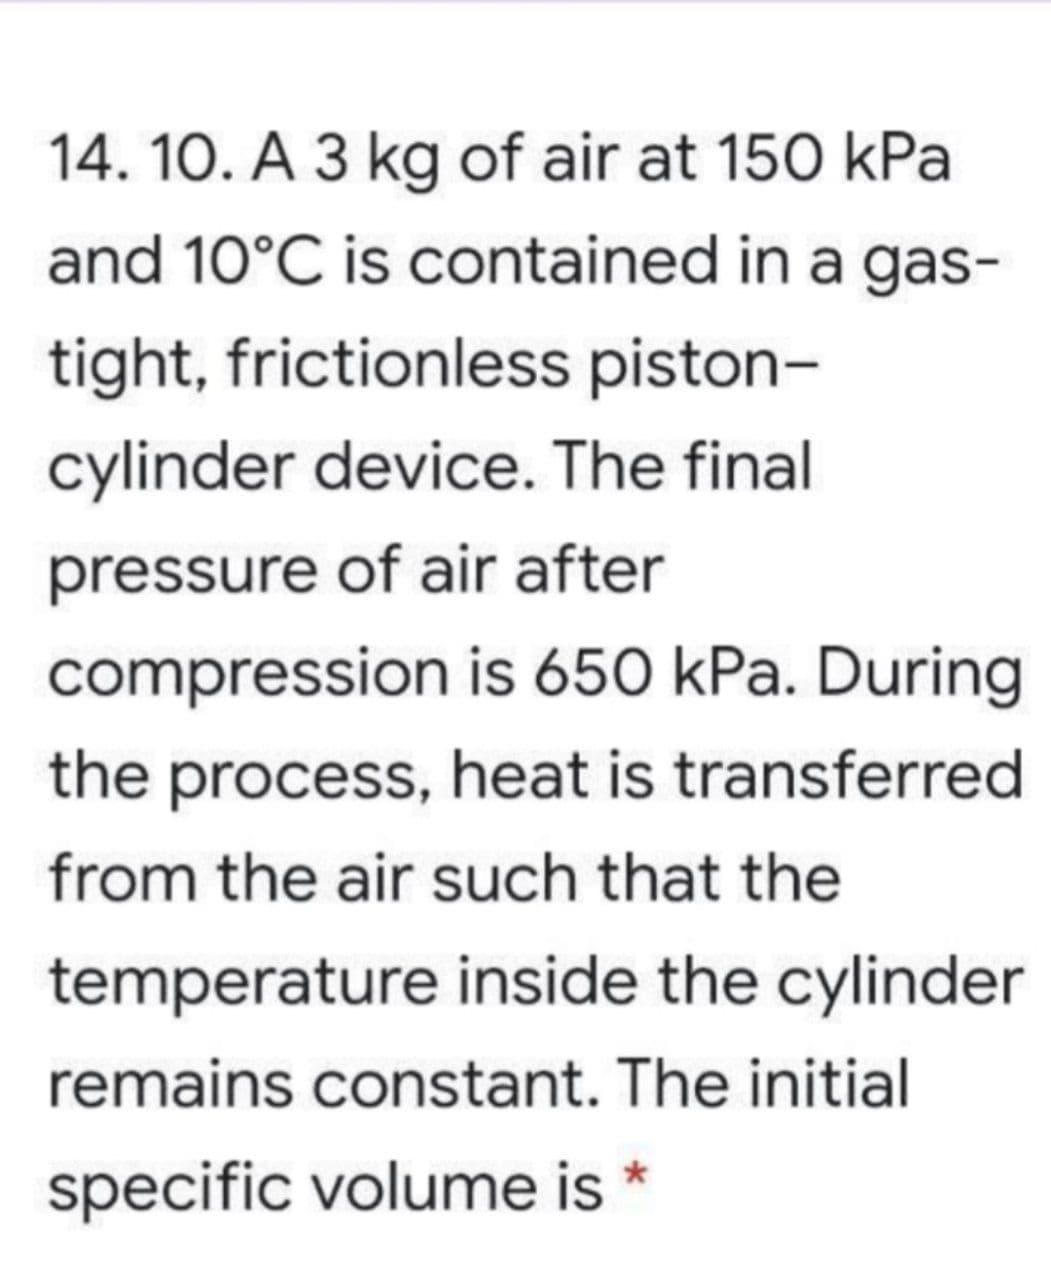 14. 10. A 3 kg of air at 150 kPa
and 10°C is contained in a gas-
tight, frictionless piston-
cylinder device. The final
pressure of air after
compression is 650 kPa. During
the process, heat is transferred
from the air such that the
temperature inside the cylinder
remains constant. The initial
specific volume is *
